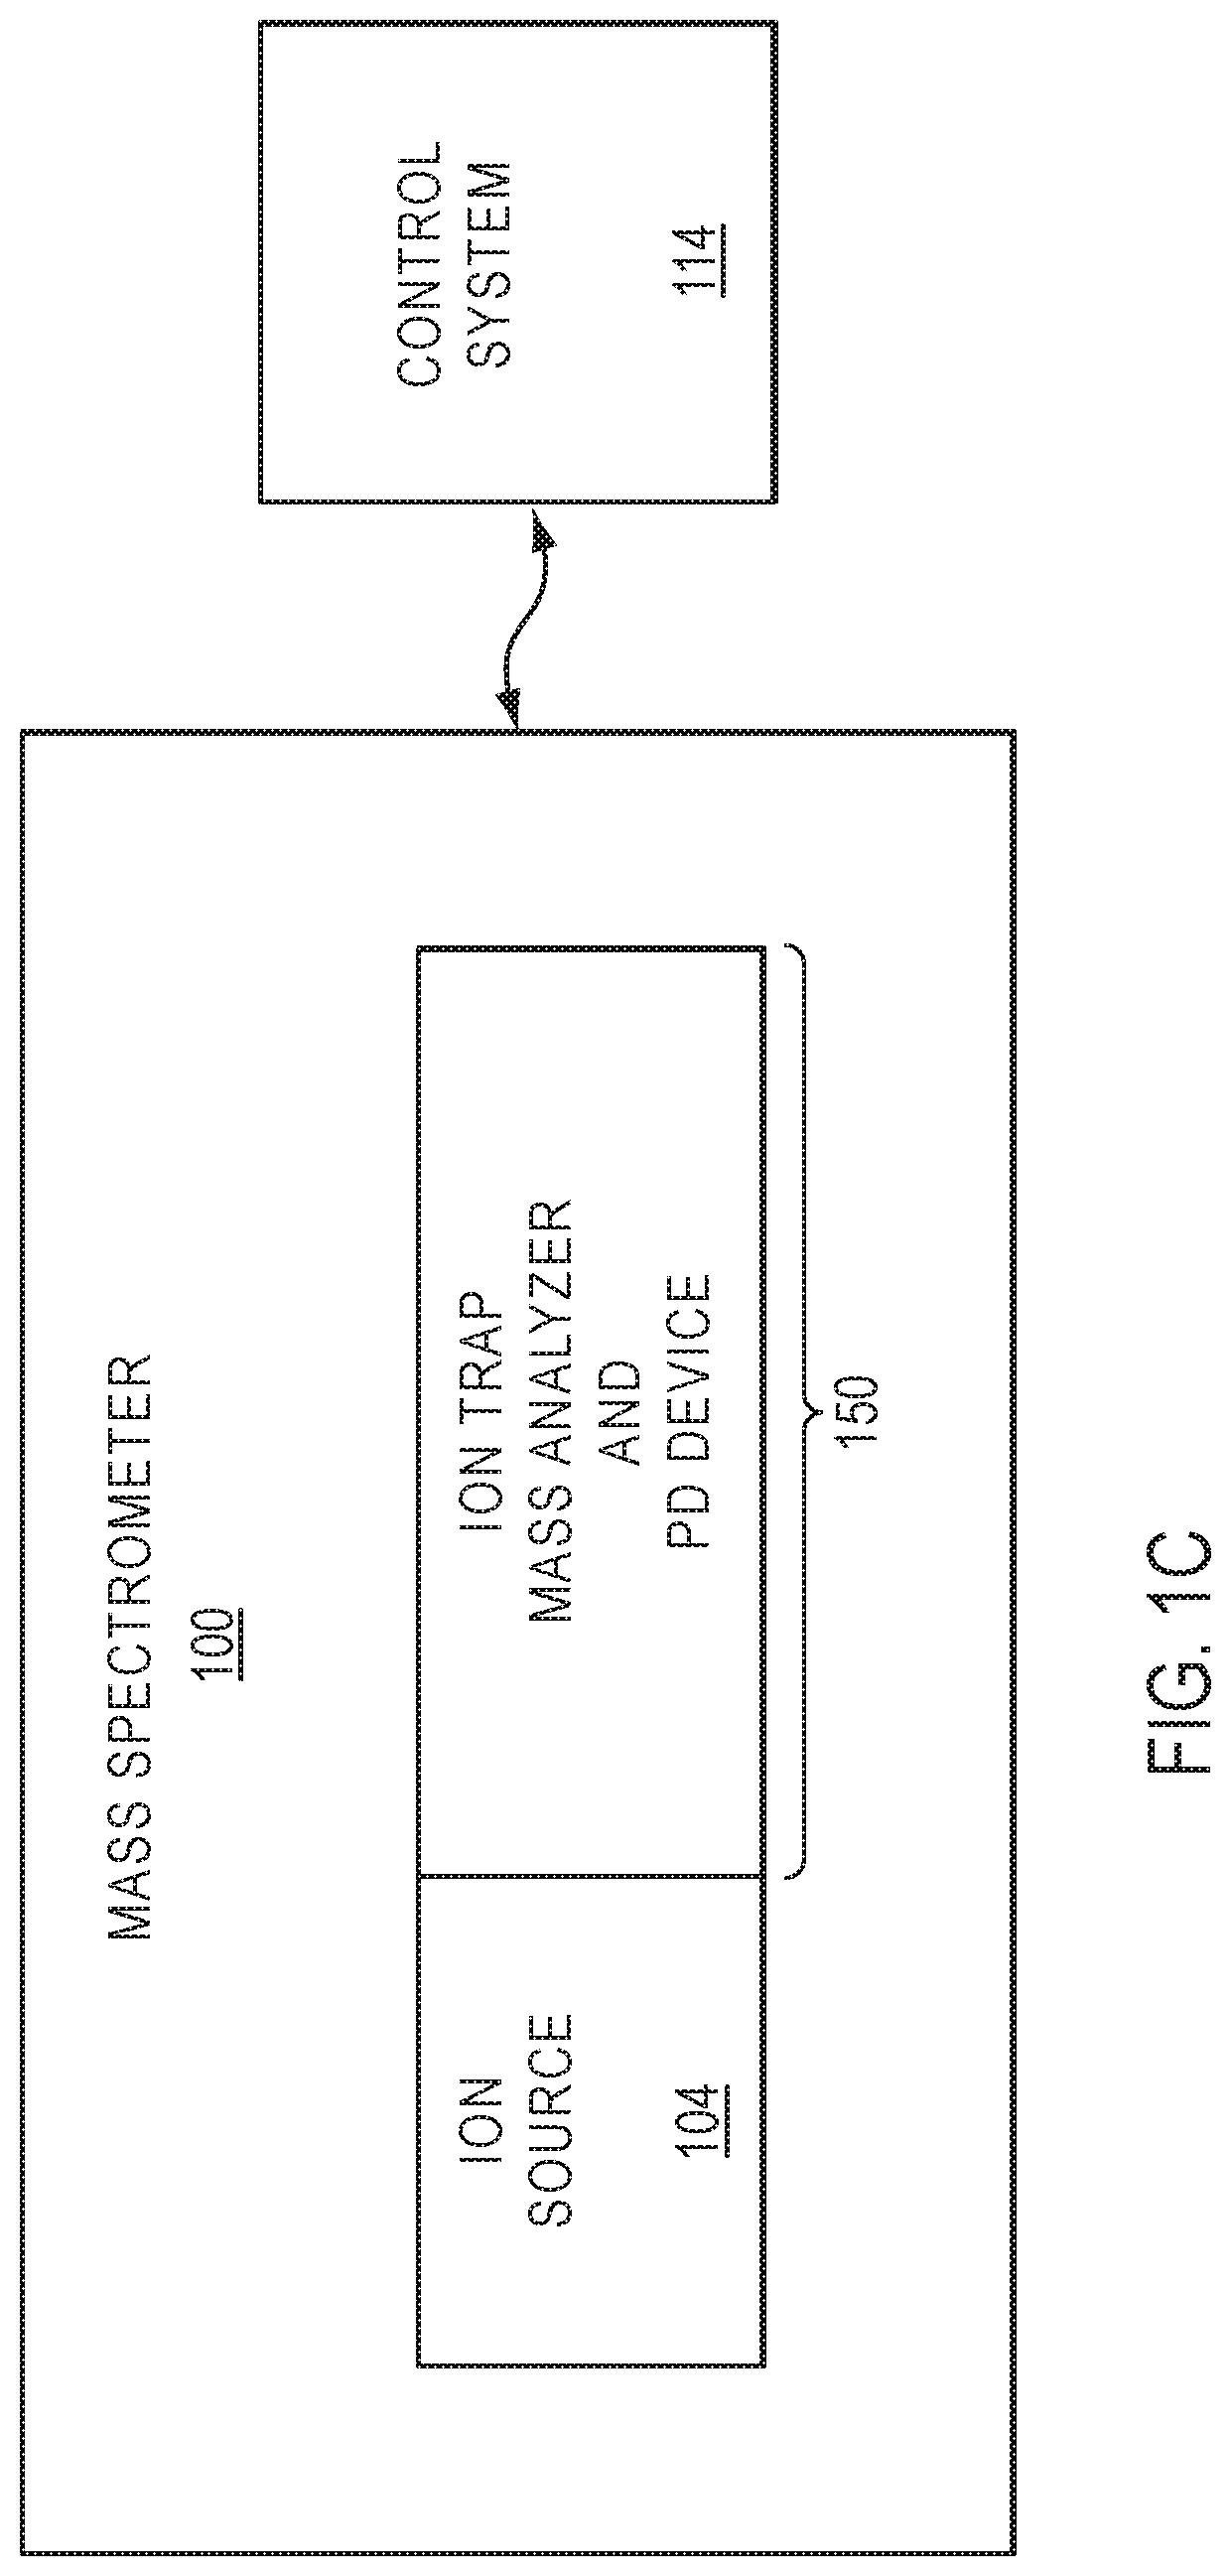 Devices, systems, and methods for dissociation of ions using light emitting diodes